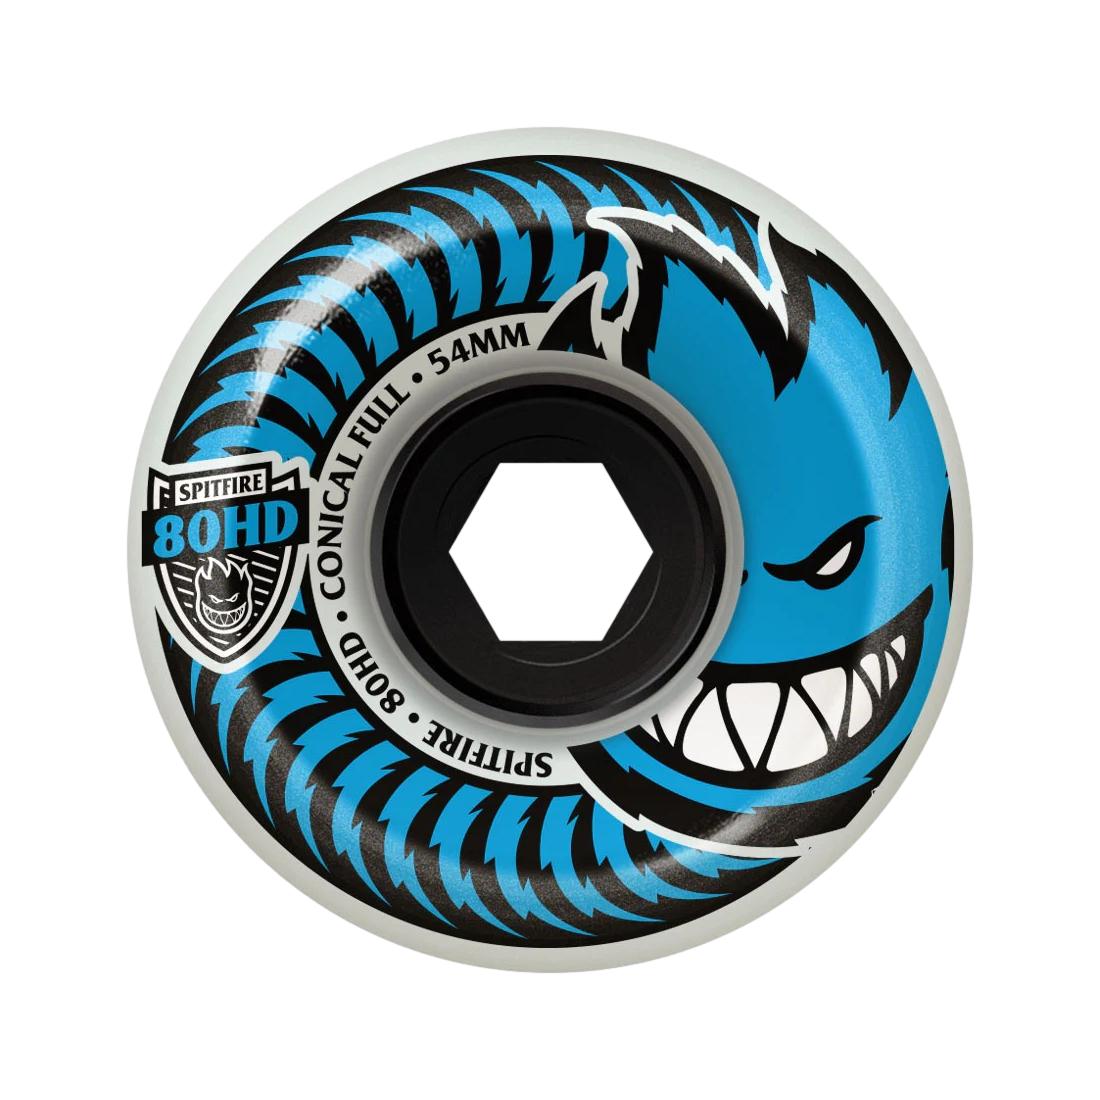 Spitfire 80HD Charger Conical 58mm Wheels - Venue Skateboards